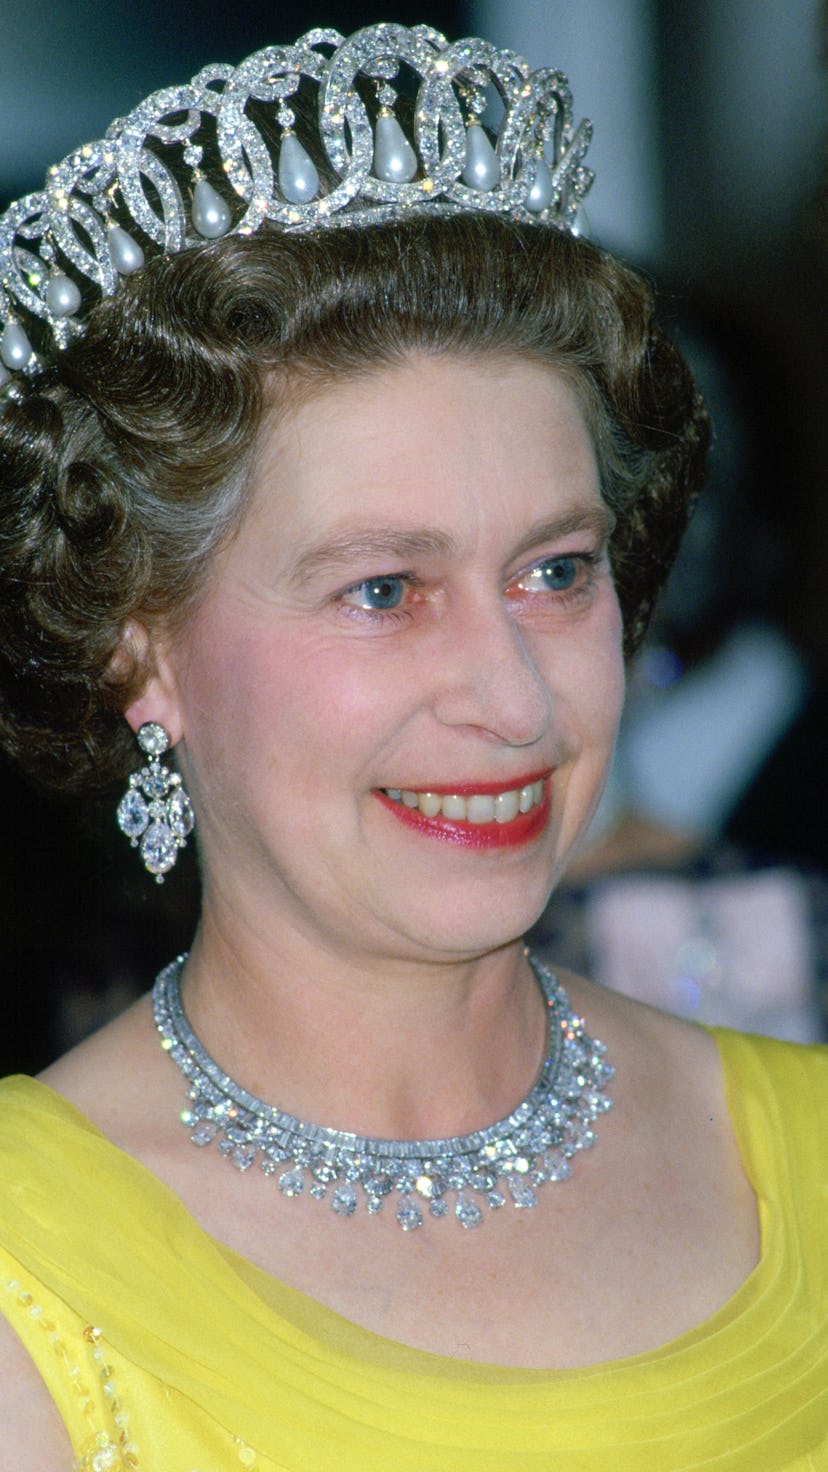 Queen Elizabeth wearing a tiara, one of the royal family's many crown jewels.